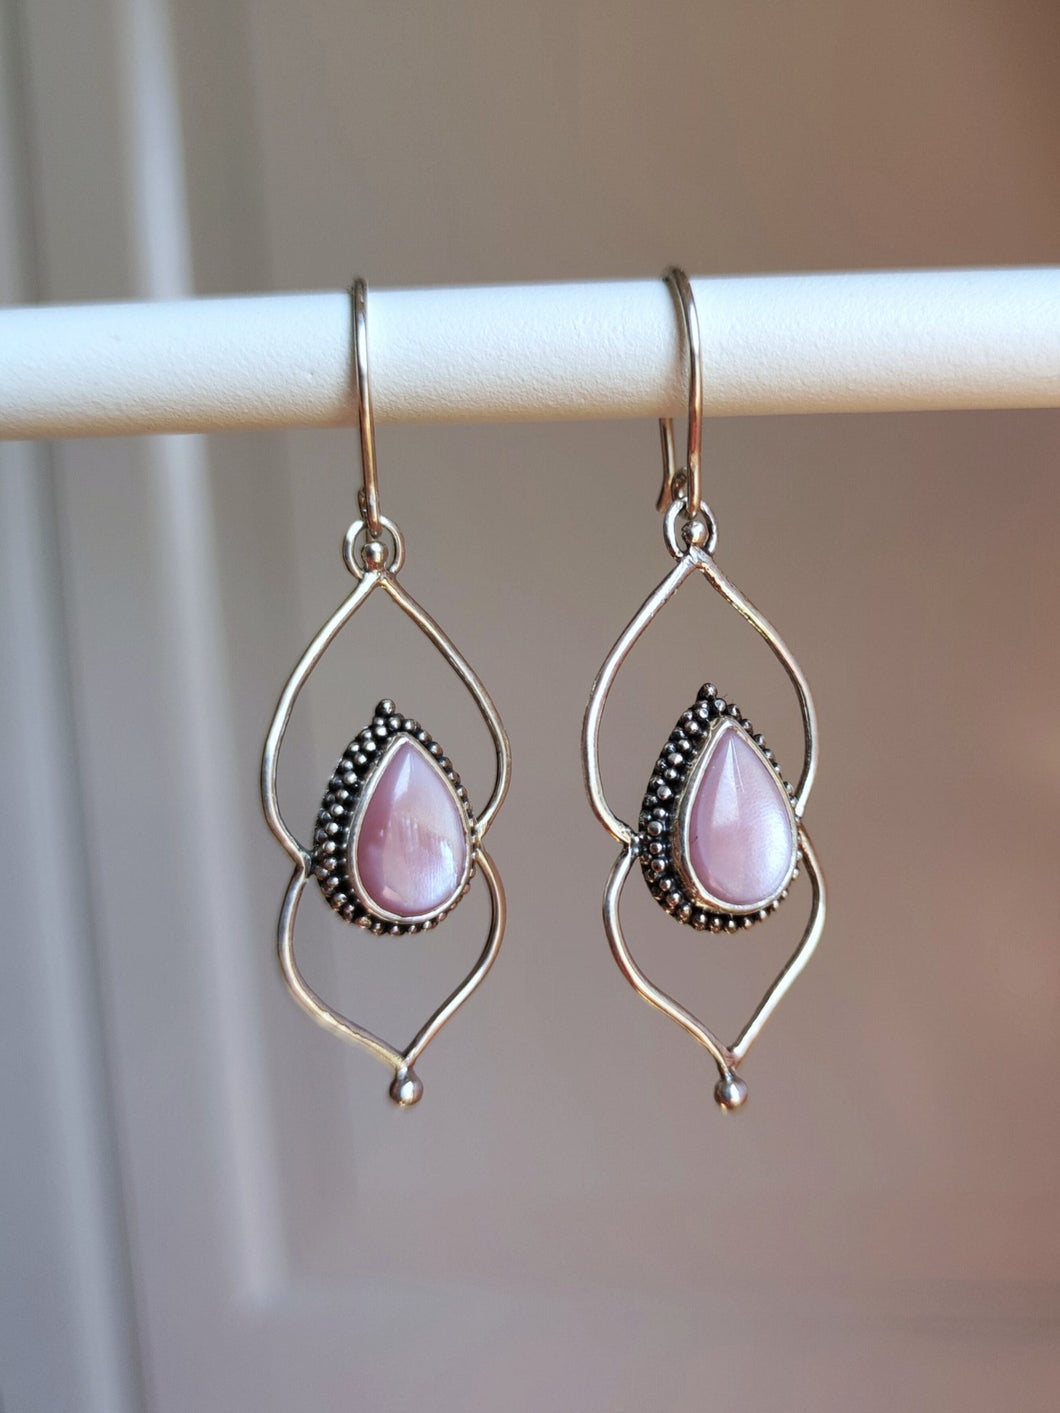 A pair of Kathrin Jona Pink Mother of Pearl Drop Granulation Earrings hanging on a hanger.